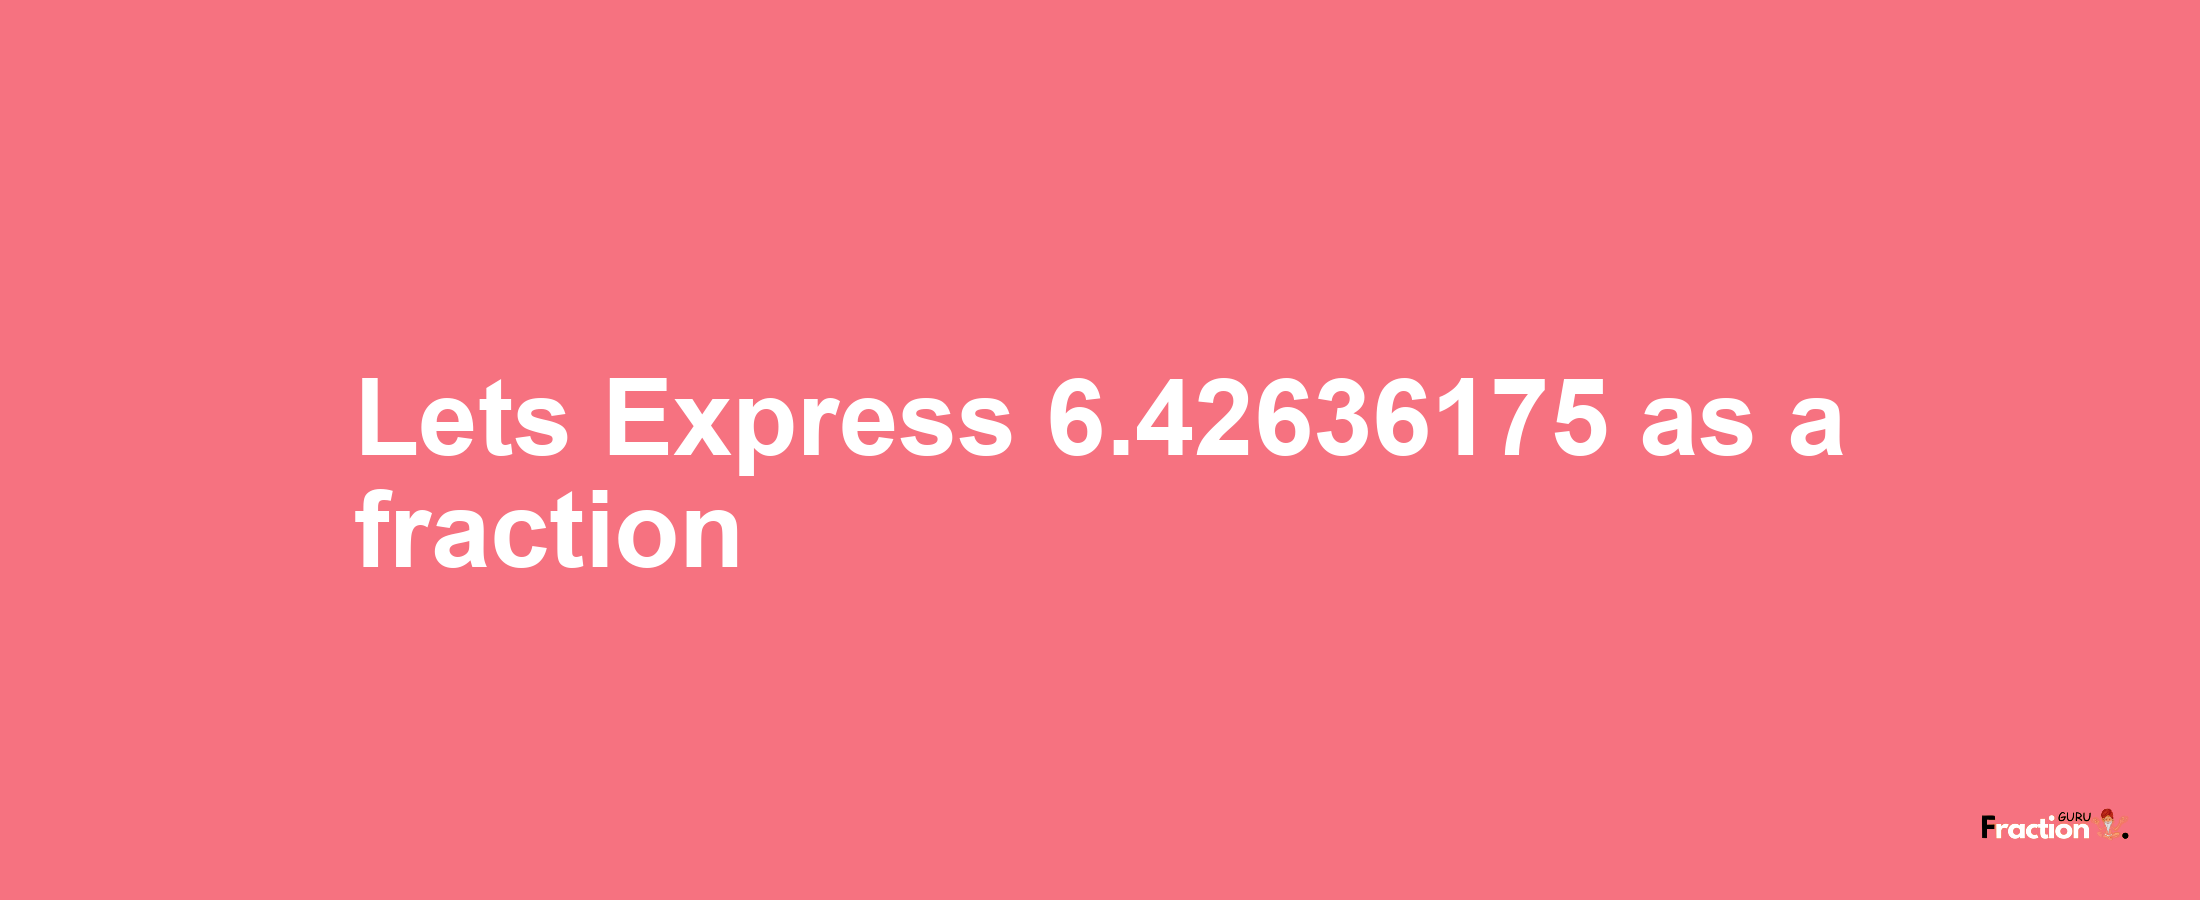 Lets Express 6.42636175 as afraction